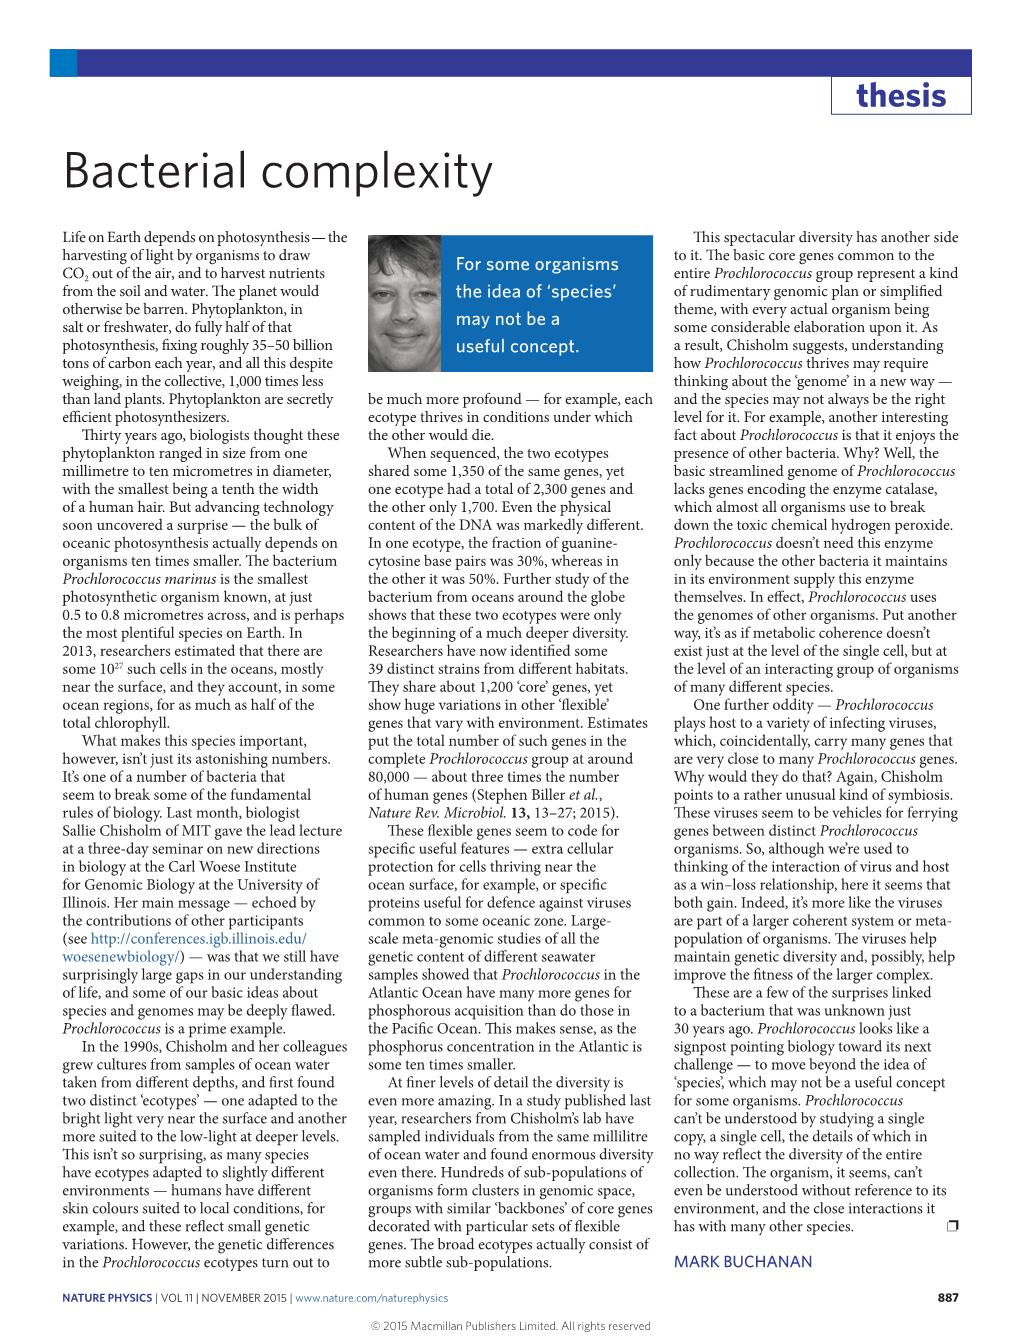 Bacterial Complexity